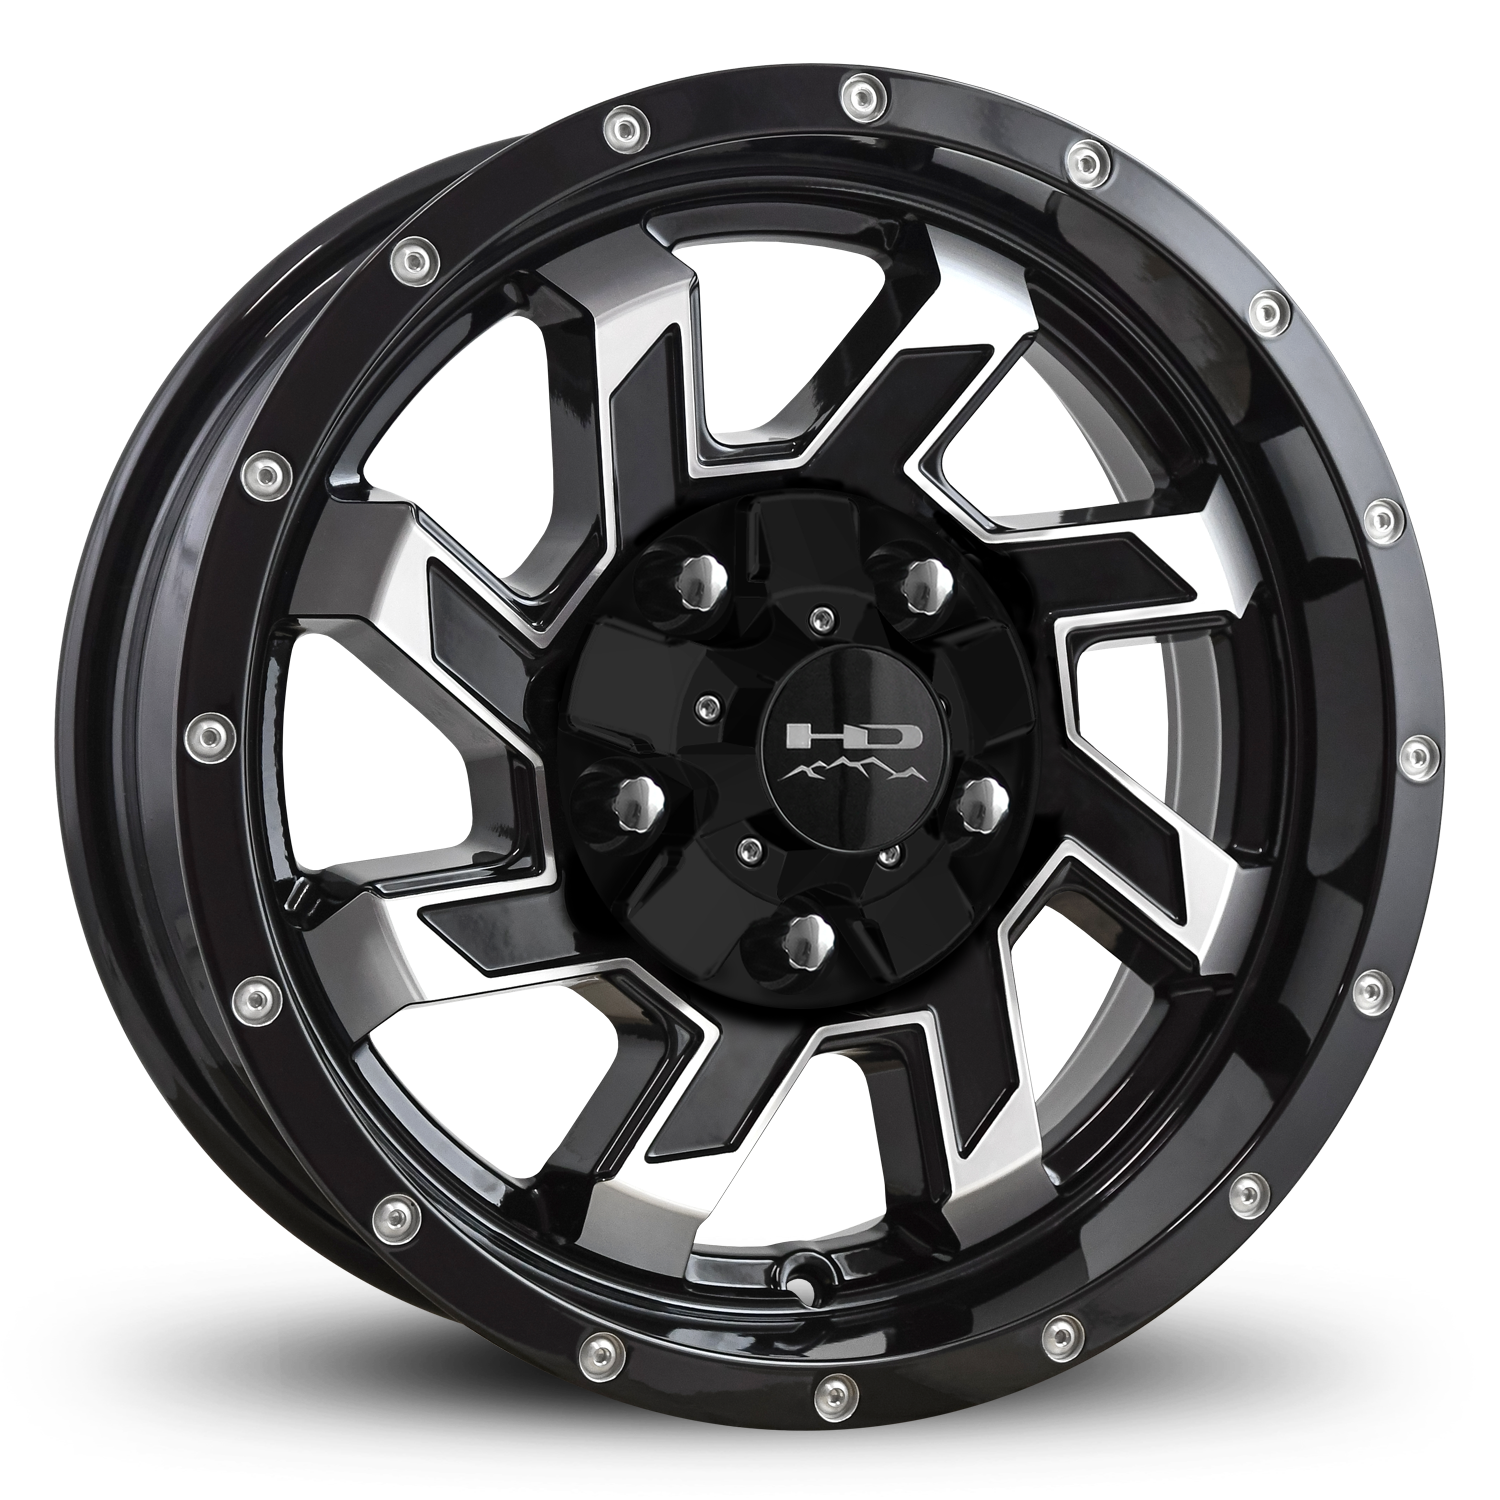 HD Off-Road SAW Custom Trailer Wheels in 15x6.0 in 5 lug Gloss Black Machined Face for Unility, Boat, Car, Construction, Horse, & RV